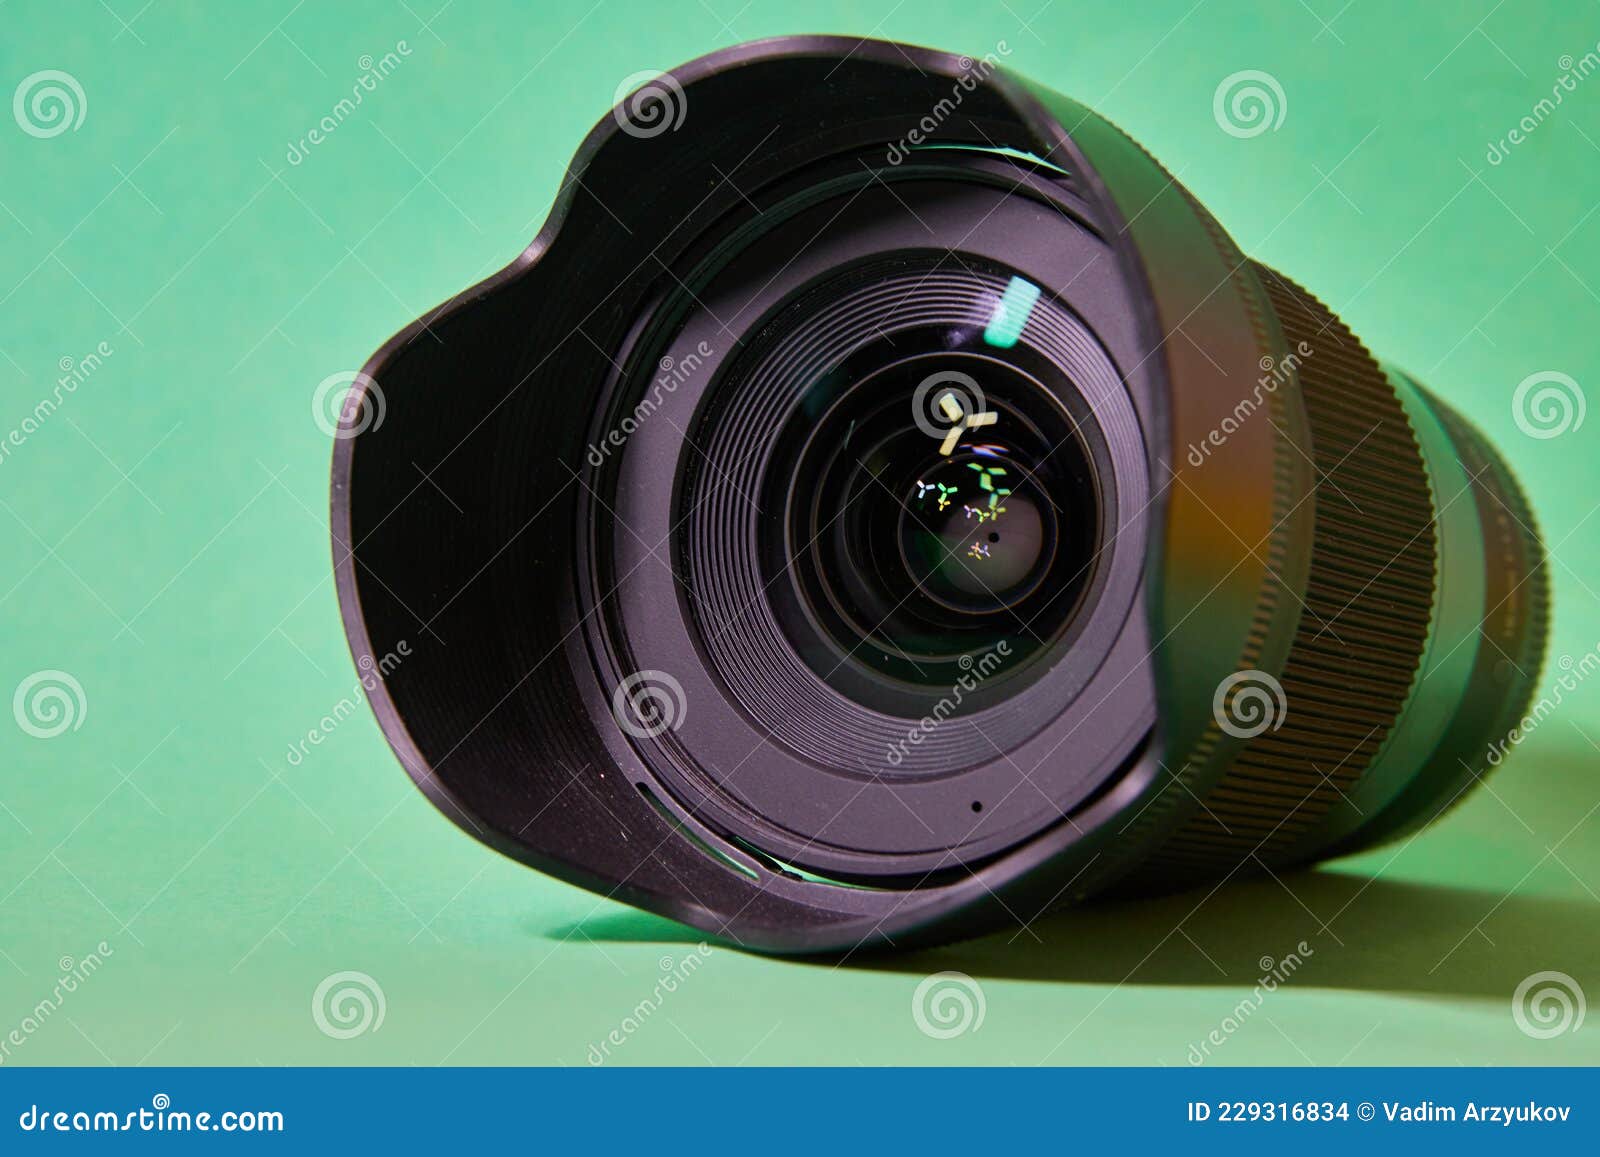 camera lens with glare on the front lens on a green background